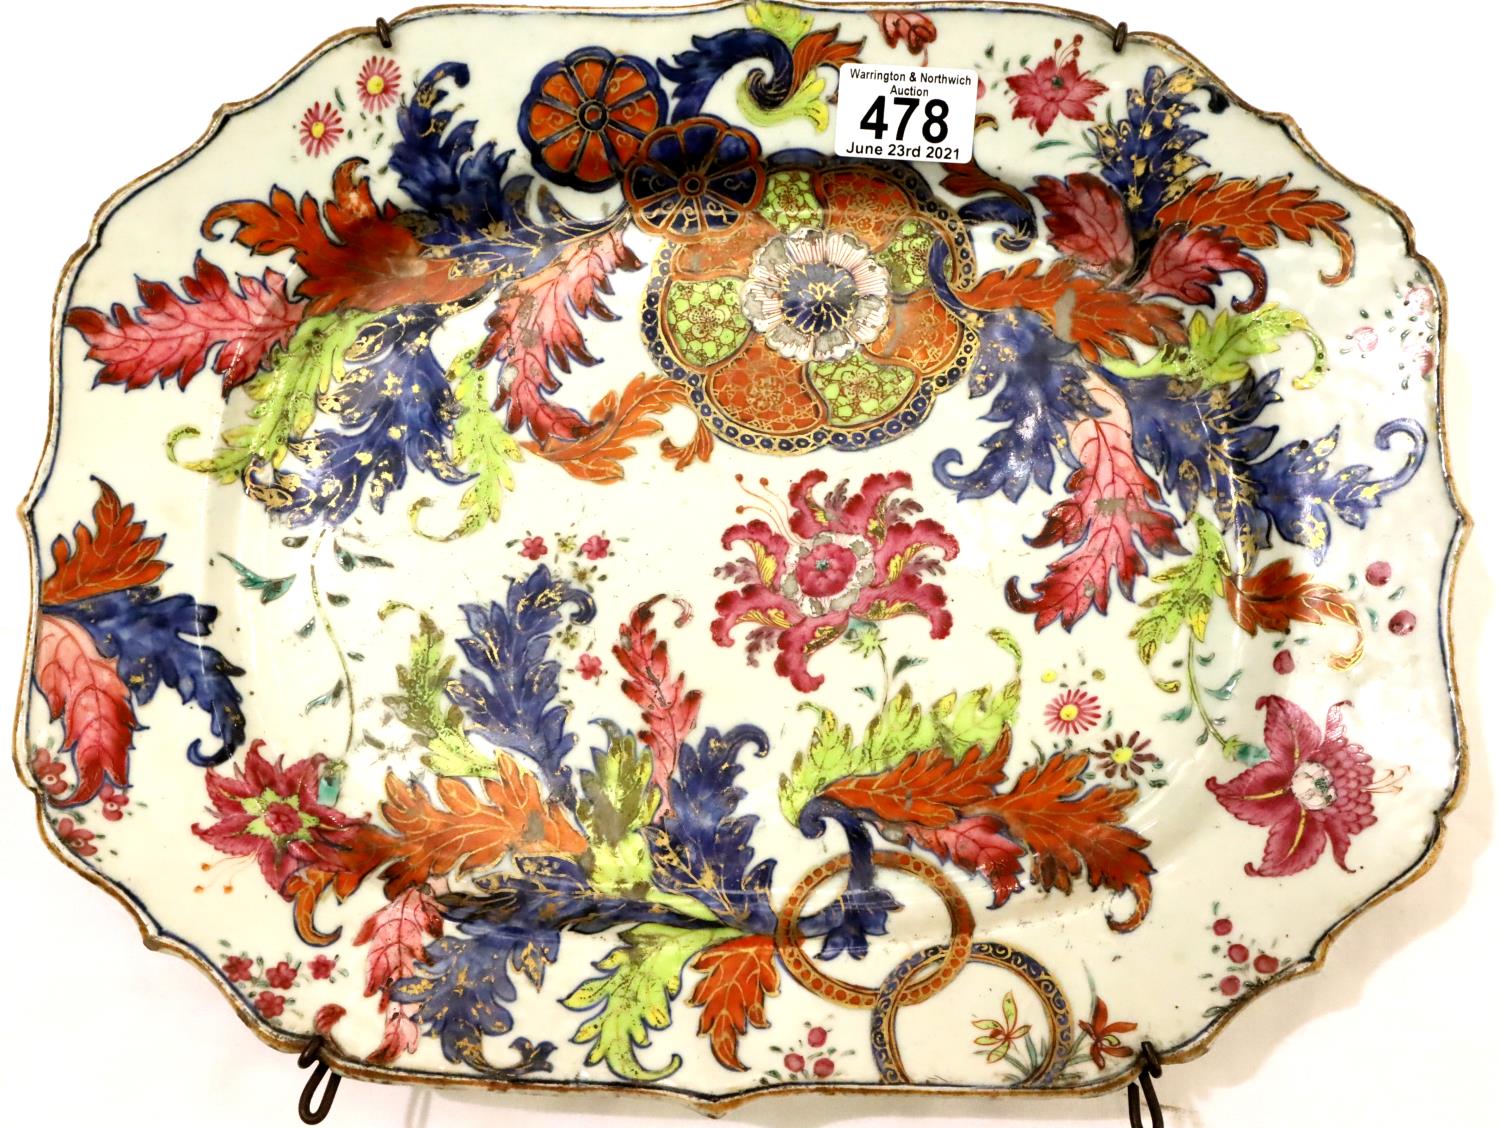 Chinese rectangular porcelain plate decorated in floral design and gilt, 35 x 26 cm. P&P Group 3 (£